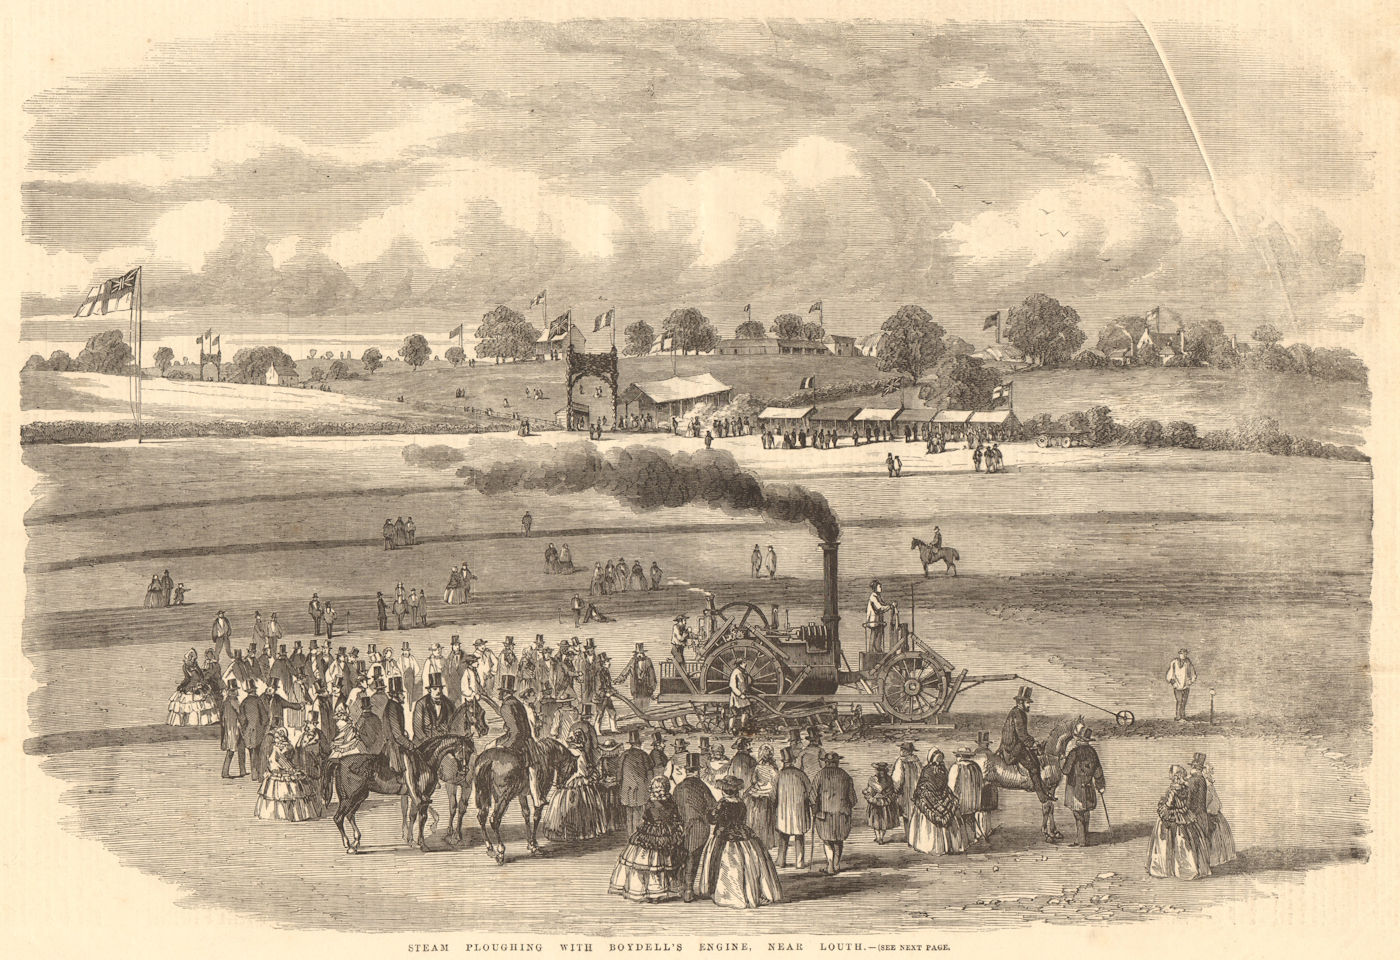 Steam ploughing with Boydell's engine, nr Louth. Lincolnshire. Engineering 1857